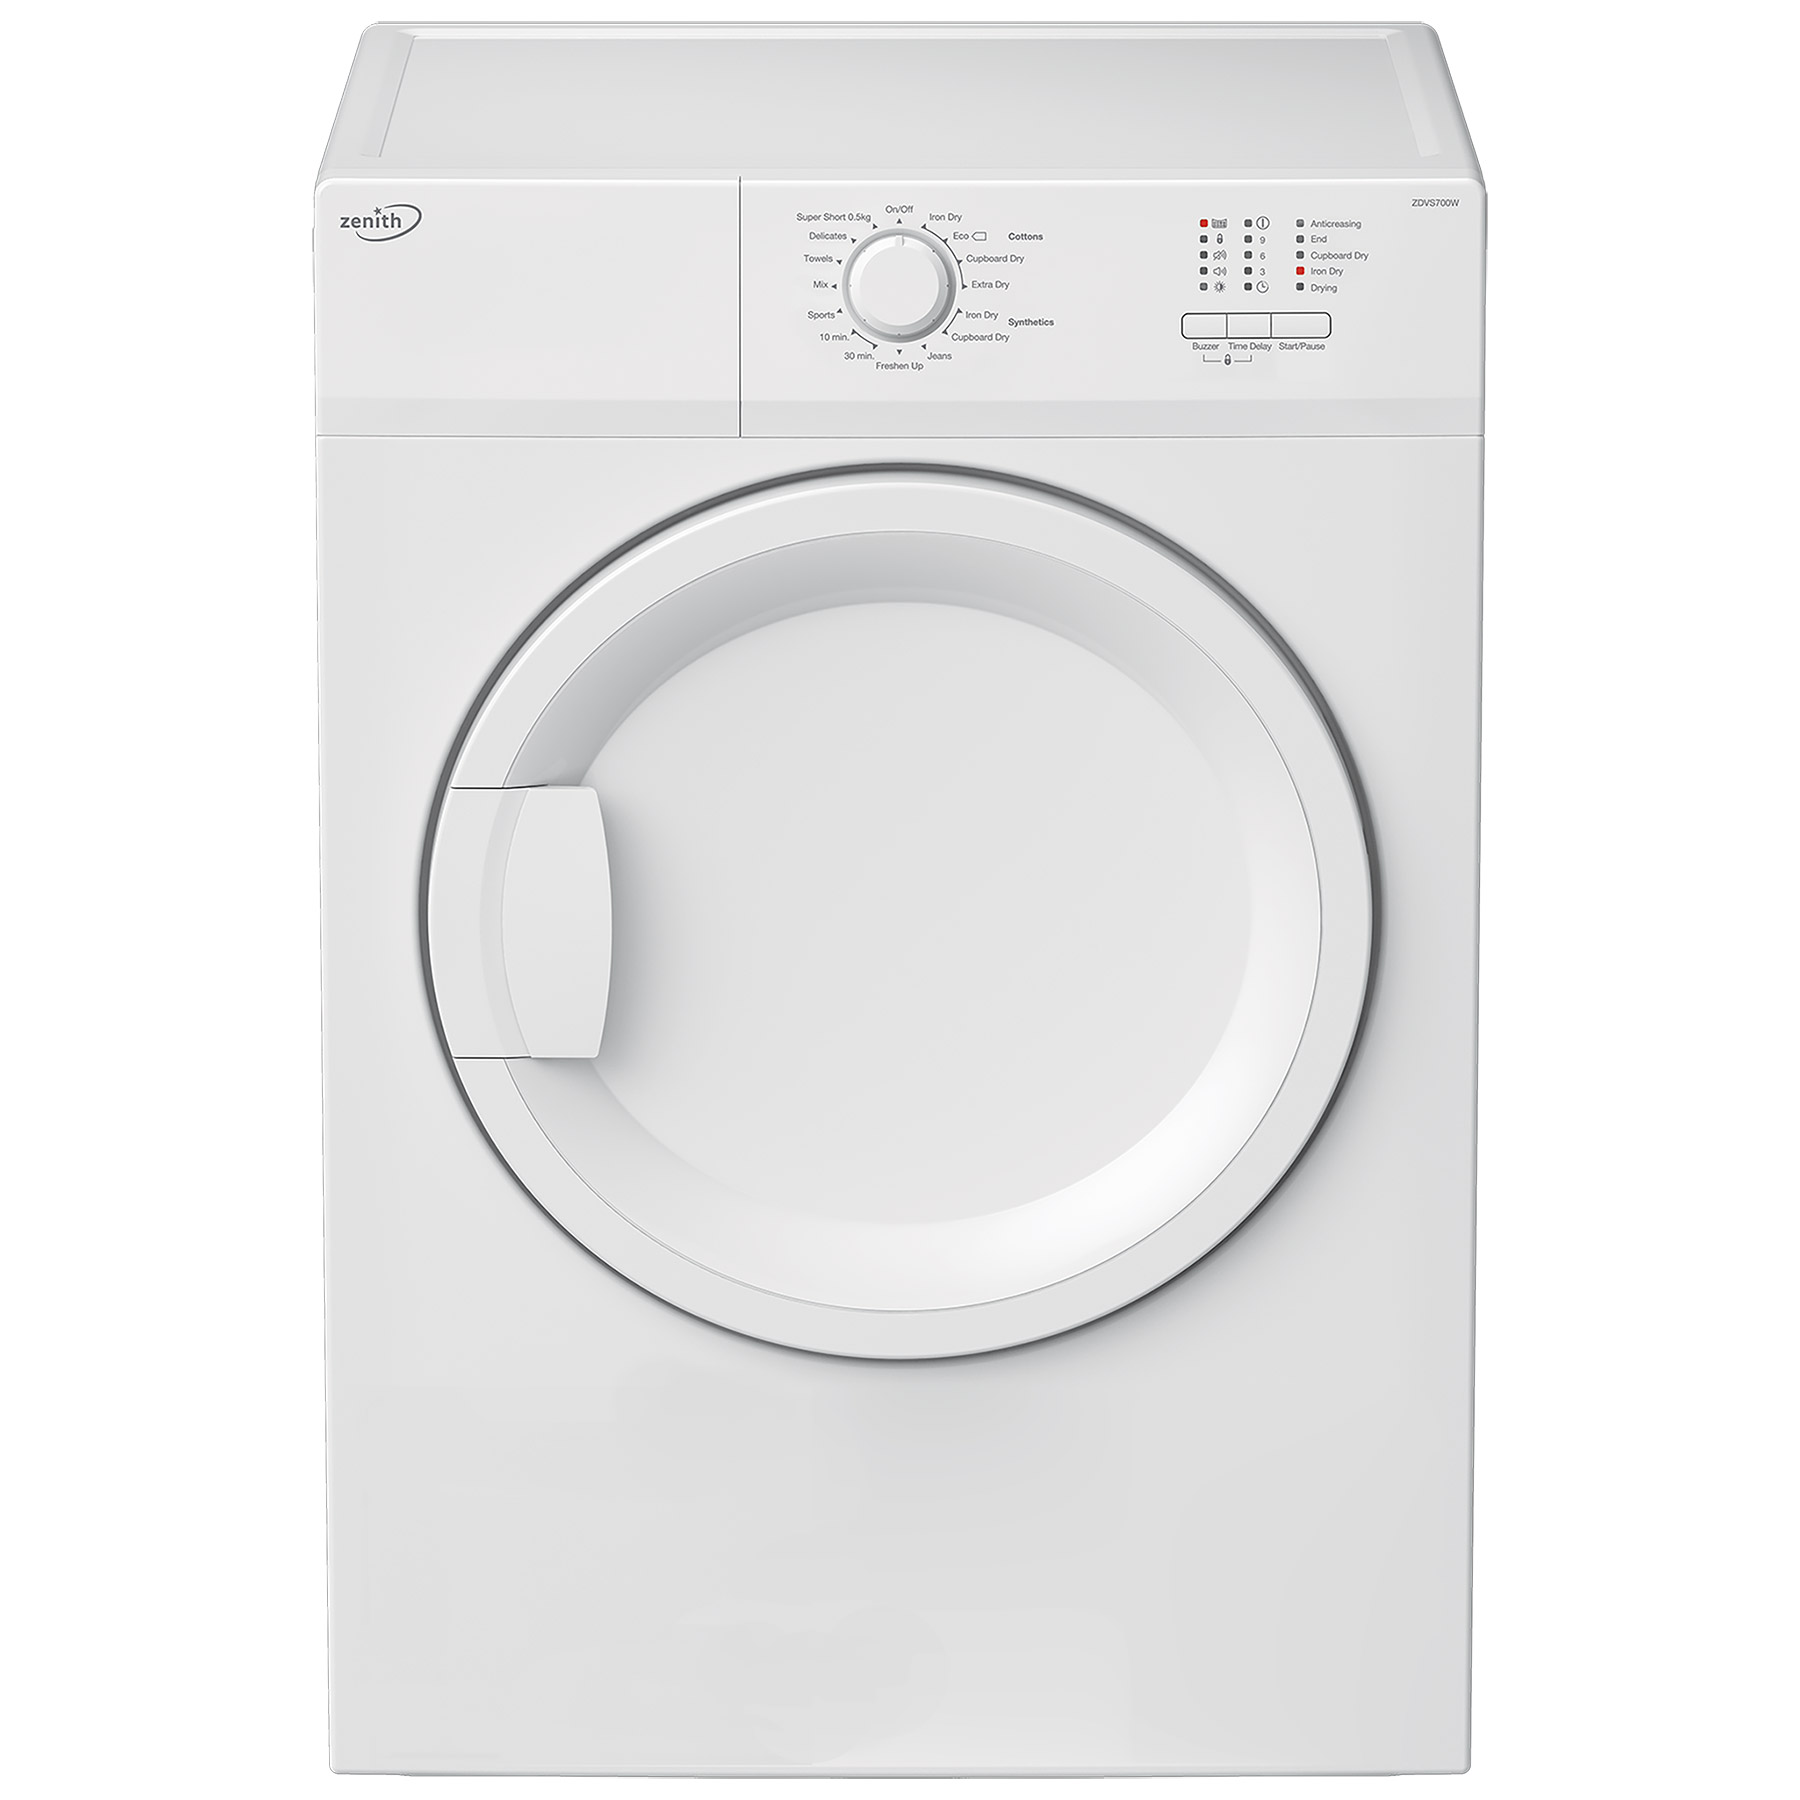 Photos - Tumble Dryer ZENITH ZDVS700W 7kg Vented Dryer in White C Rated Sensor 